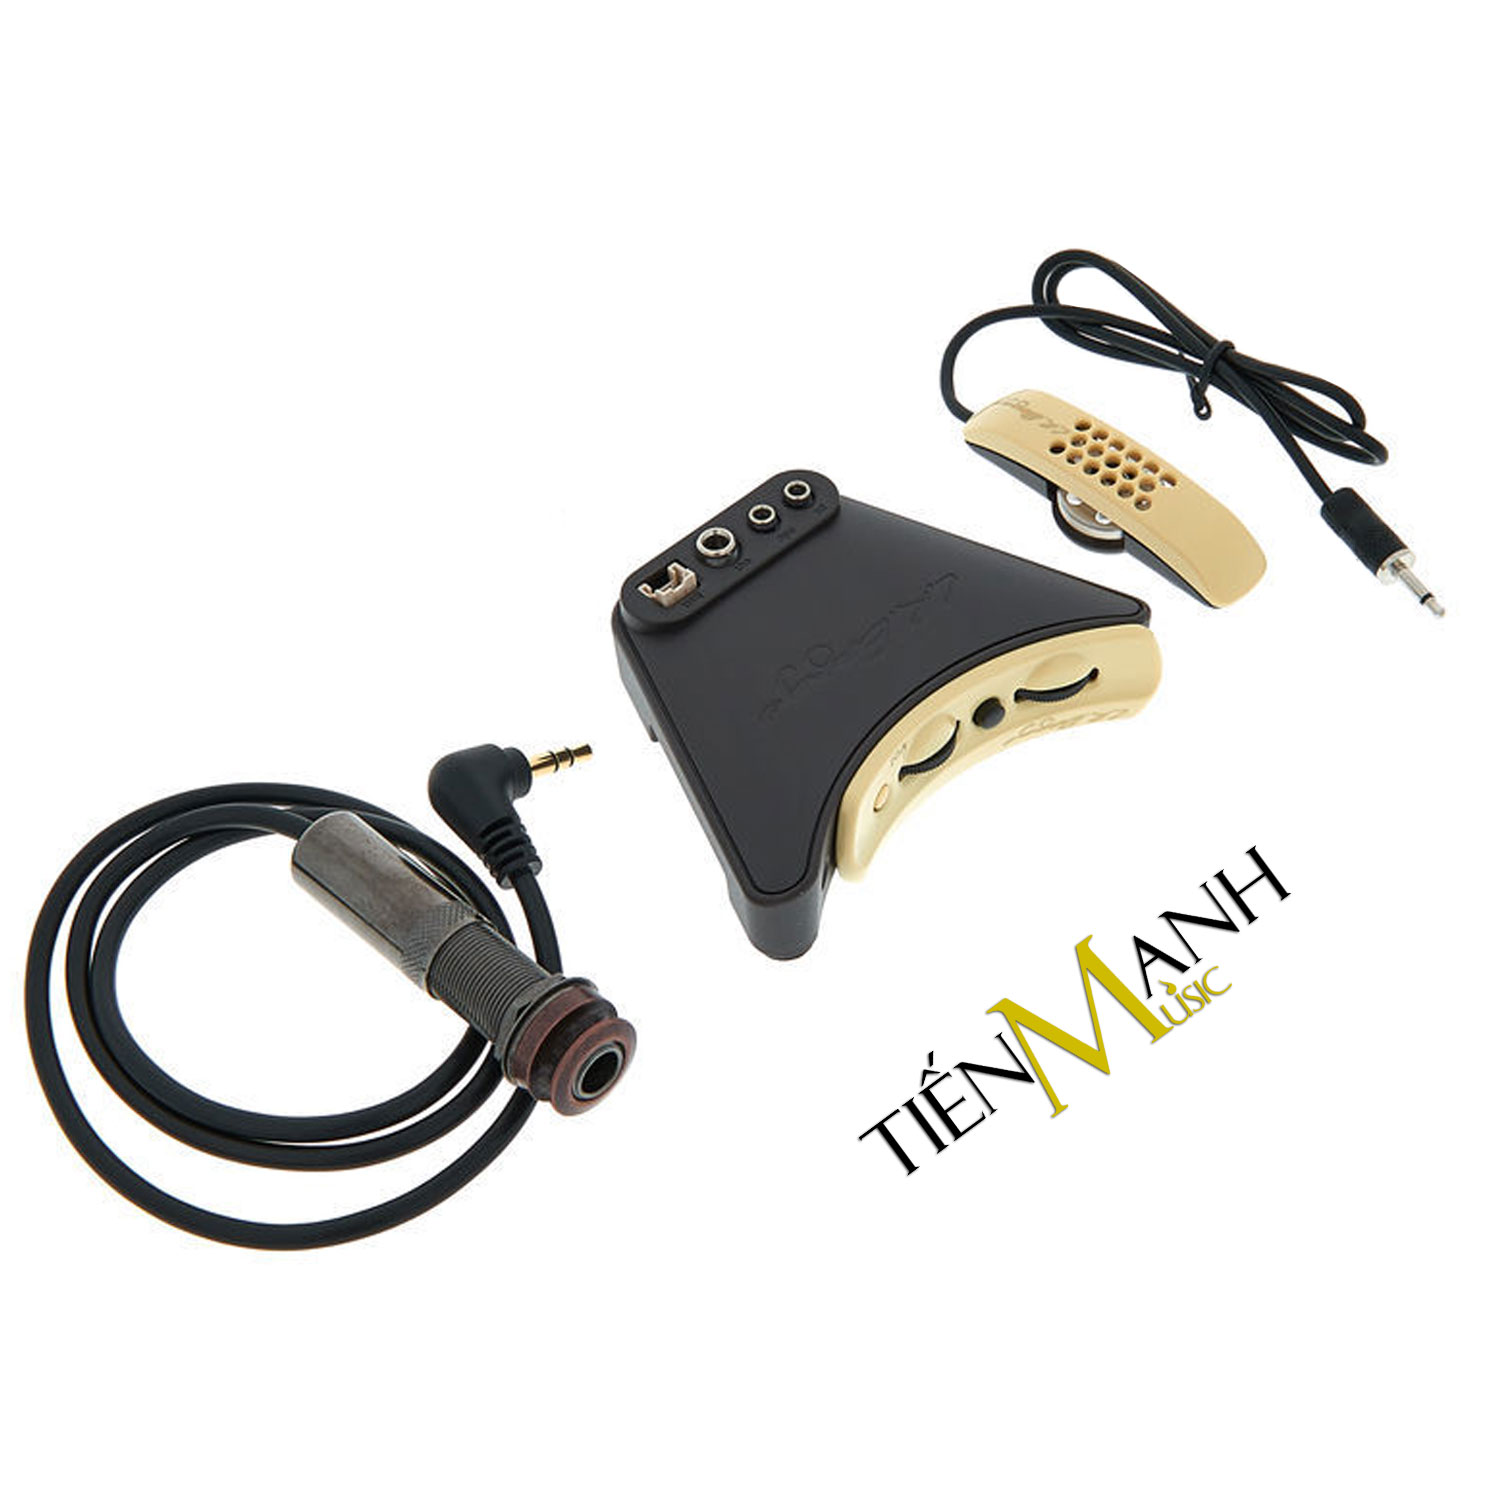 Cach-su-dung-Acoustic-Guitar-Pickup-LR-Baggs-Anthem.jpg